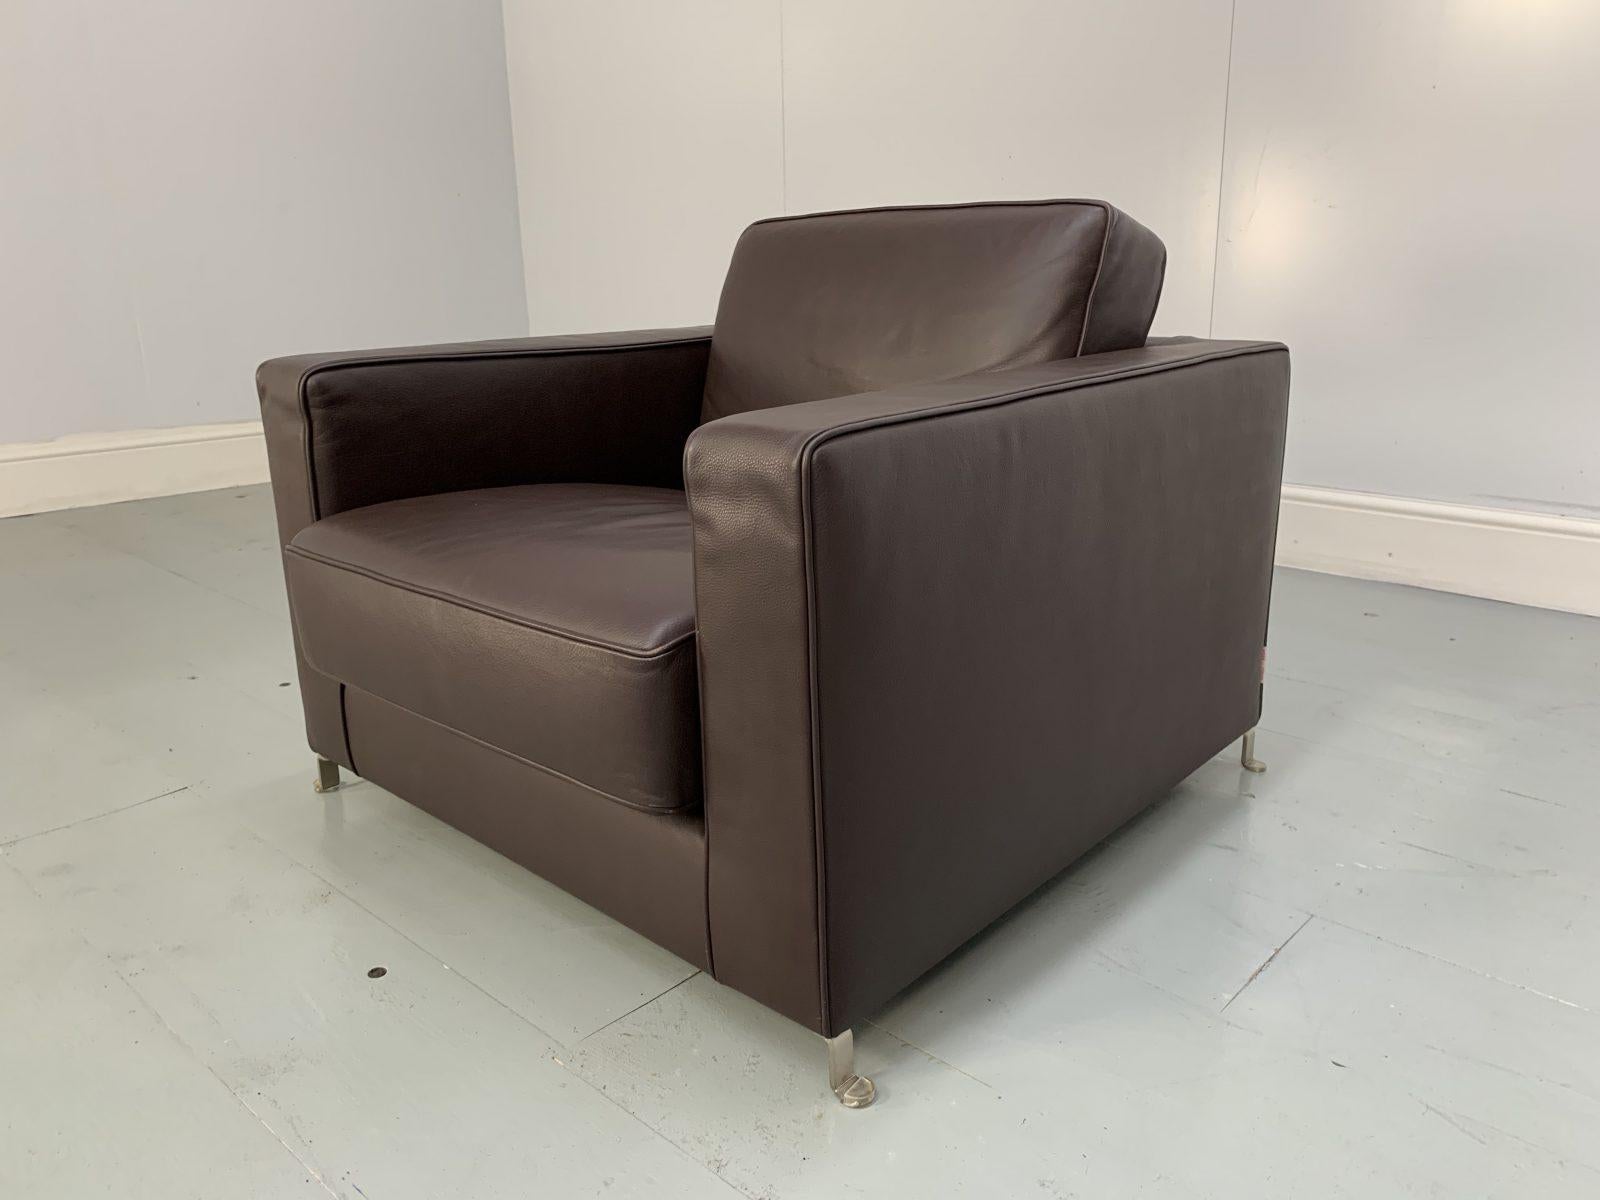 On offer on this occasion is the rarest of opportunities to acquire a sensational, impeccably-presented, iconic “Bob” Movement Armchair in Natural Dark-Brown Leather, from the world renown Italian furniture house of Flexform. 
As you will no doubt